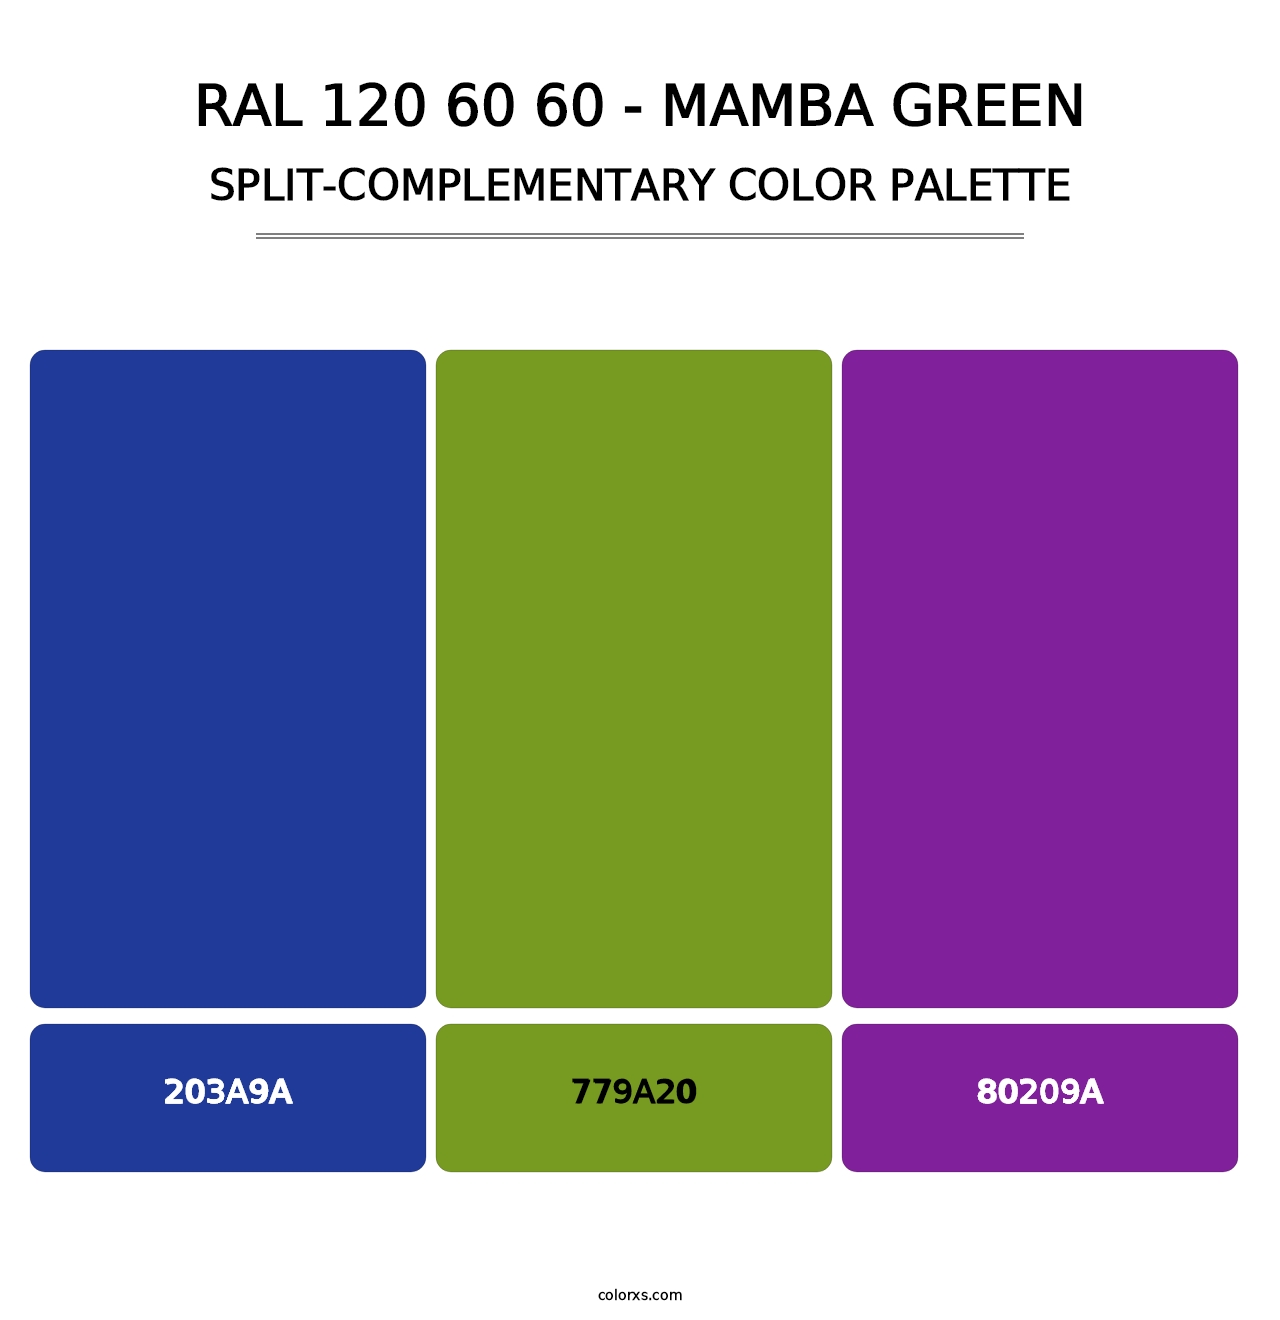 RAL 120 60 60 - Mamba Green - Split-Complementary Color Palette